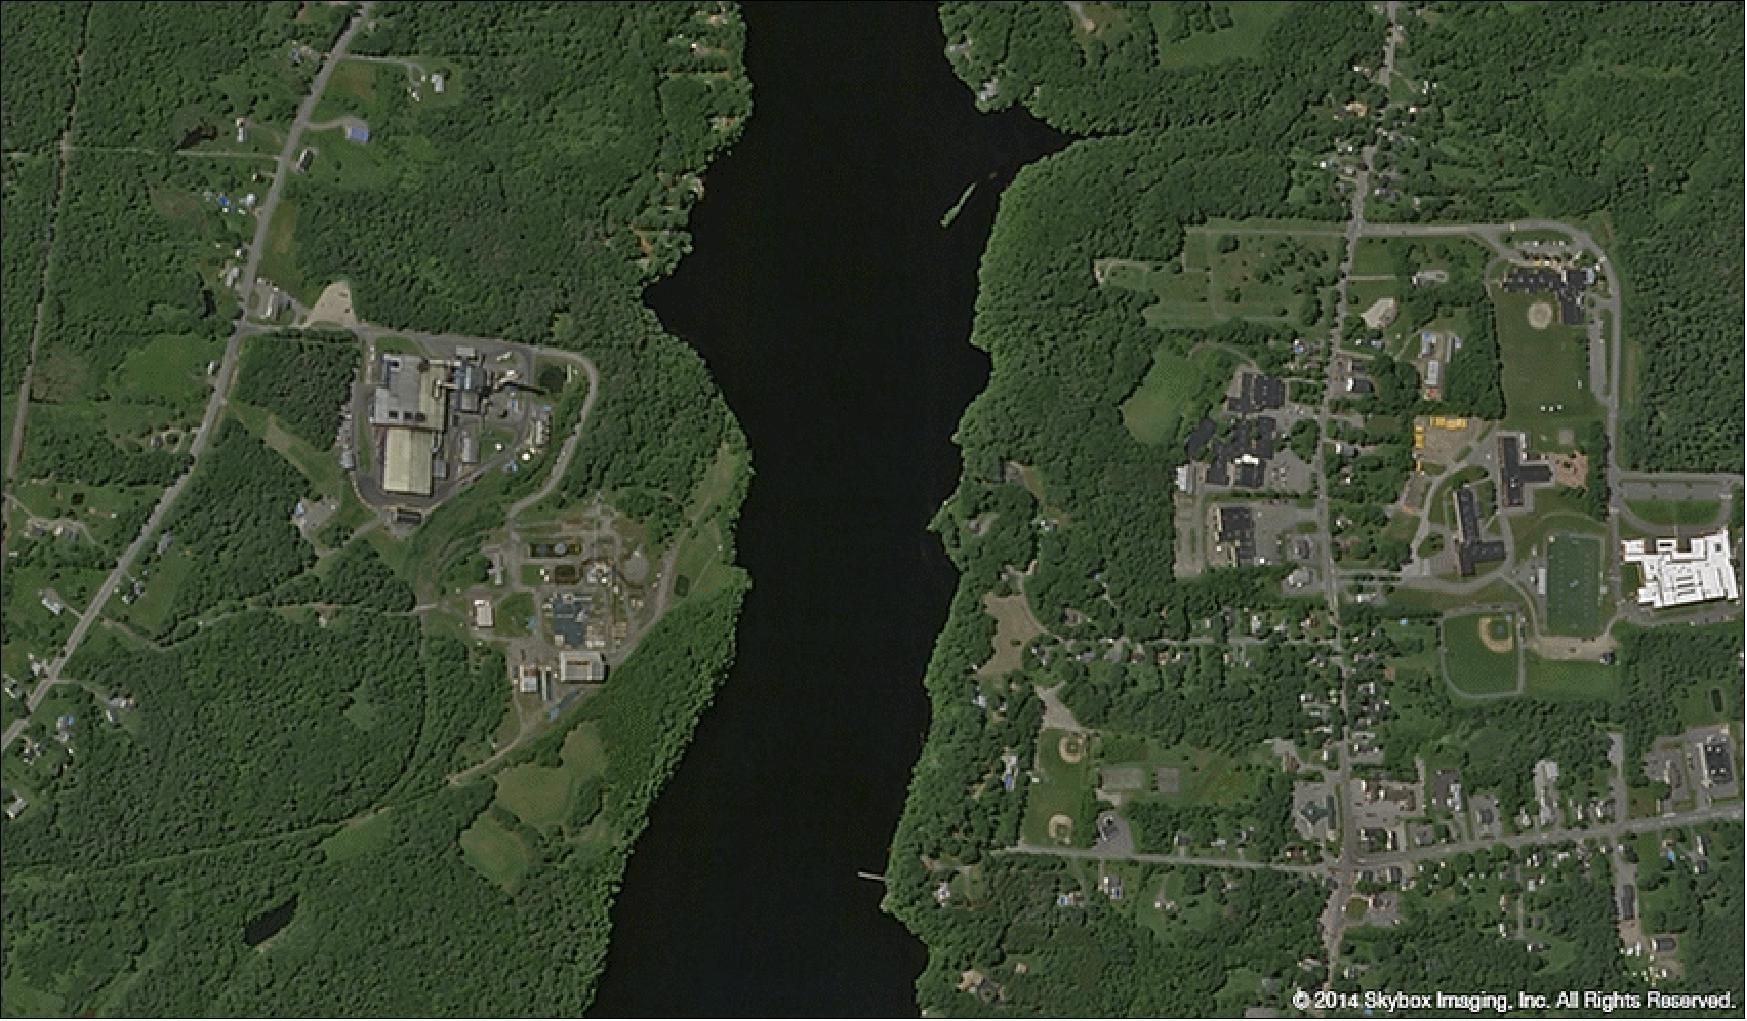 Figure 32: SkySat-2 image of Bangor, Maine, USA, acquired on July 10, 2014 (image credit: Skybox Imaging) 66)